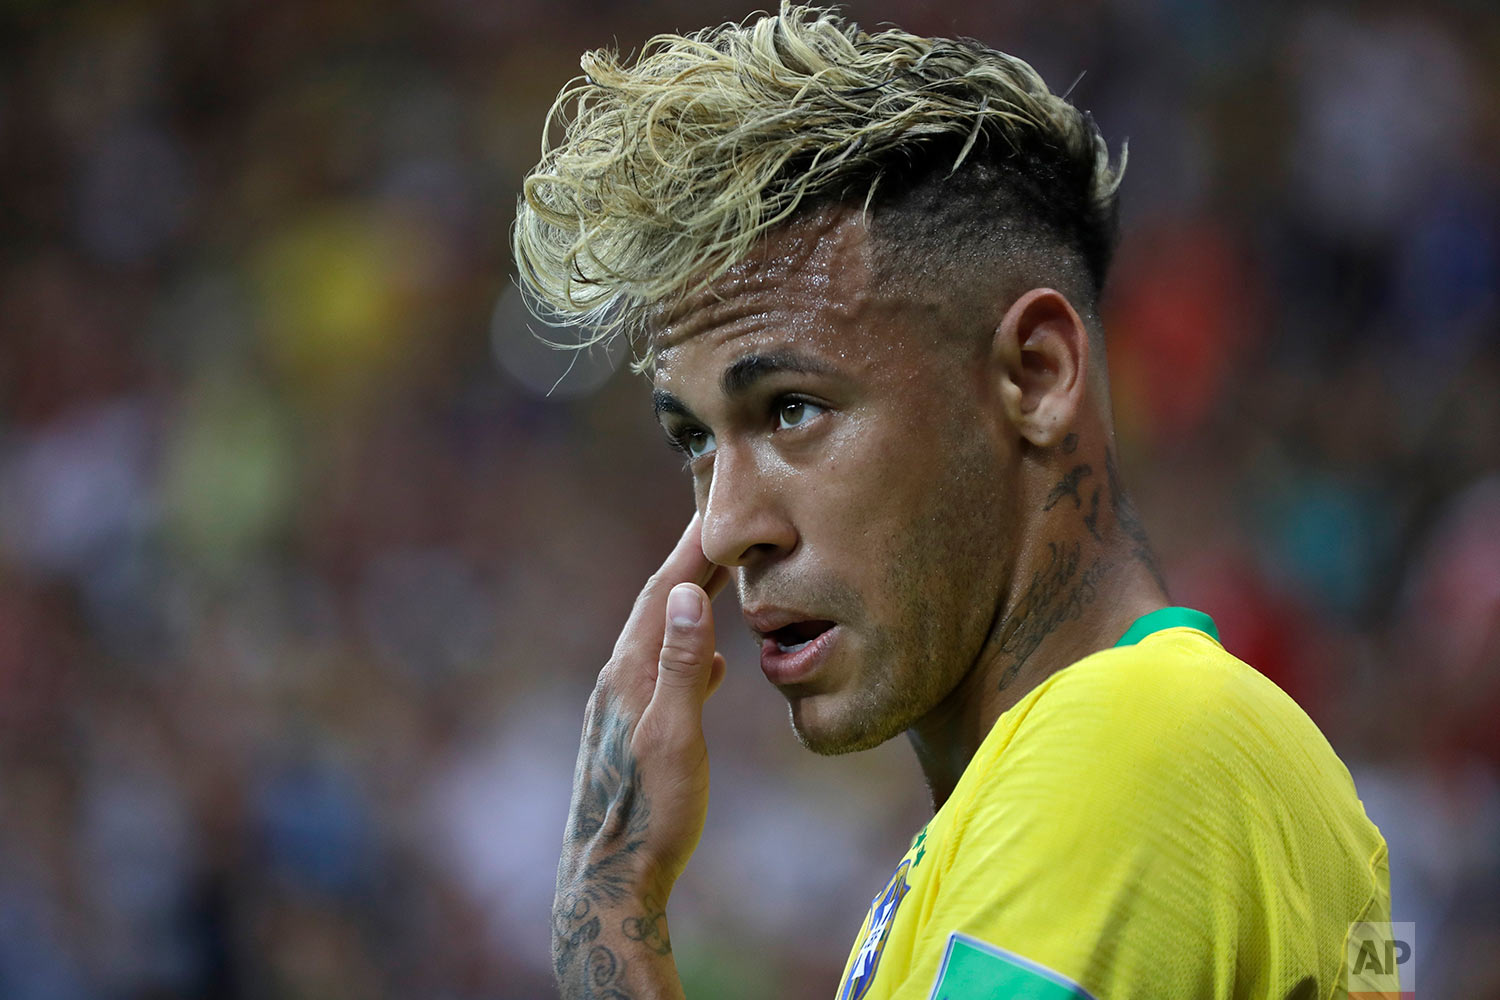  Brazil's Neymar during the group E match between Brazil and Switzerland at the 2018 soccer World Cup in the Rostov Arena in Rostov-on-Don, Russia, Sunday, June 17, 2018. (AP Photo/Themba Hadebe) 